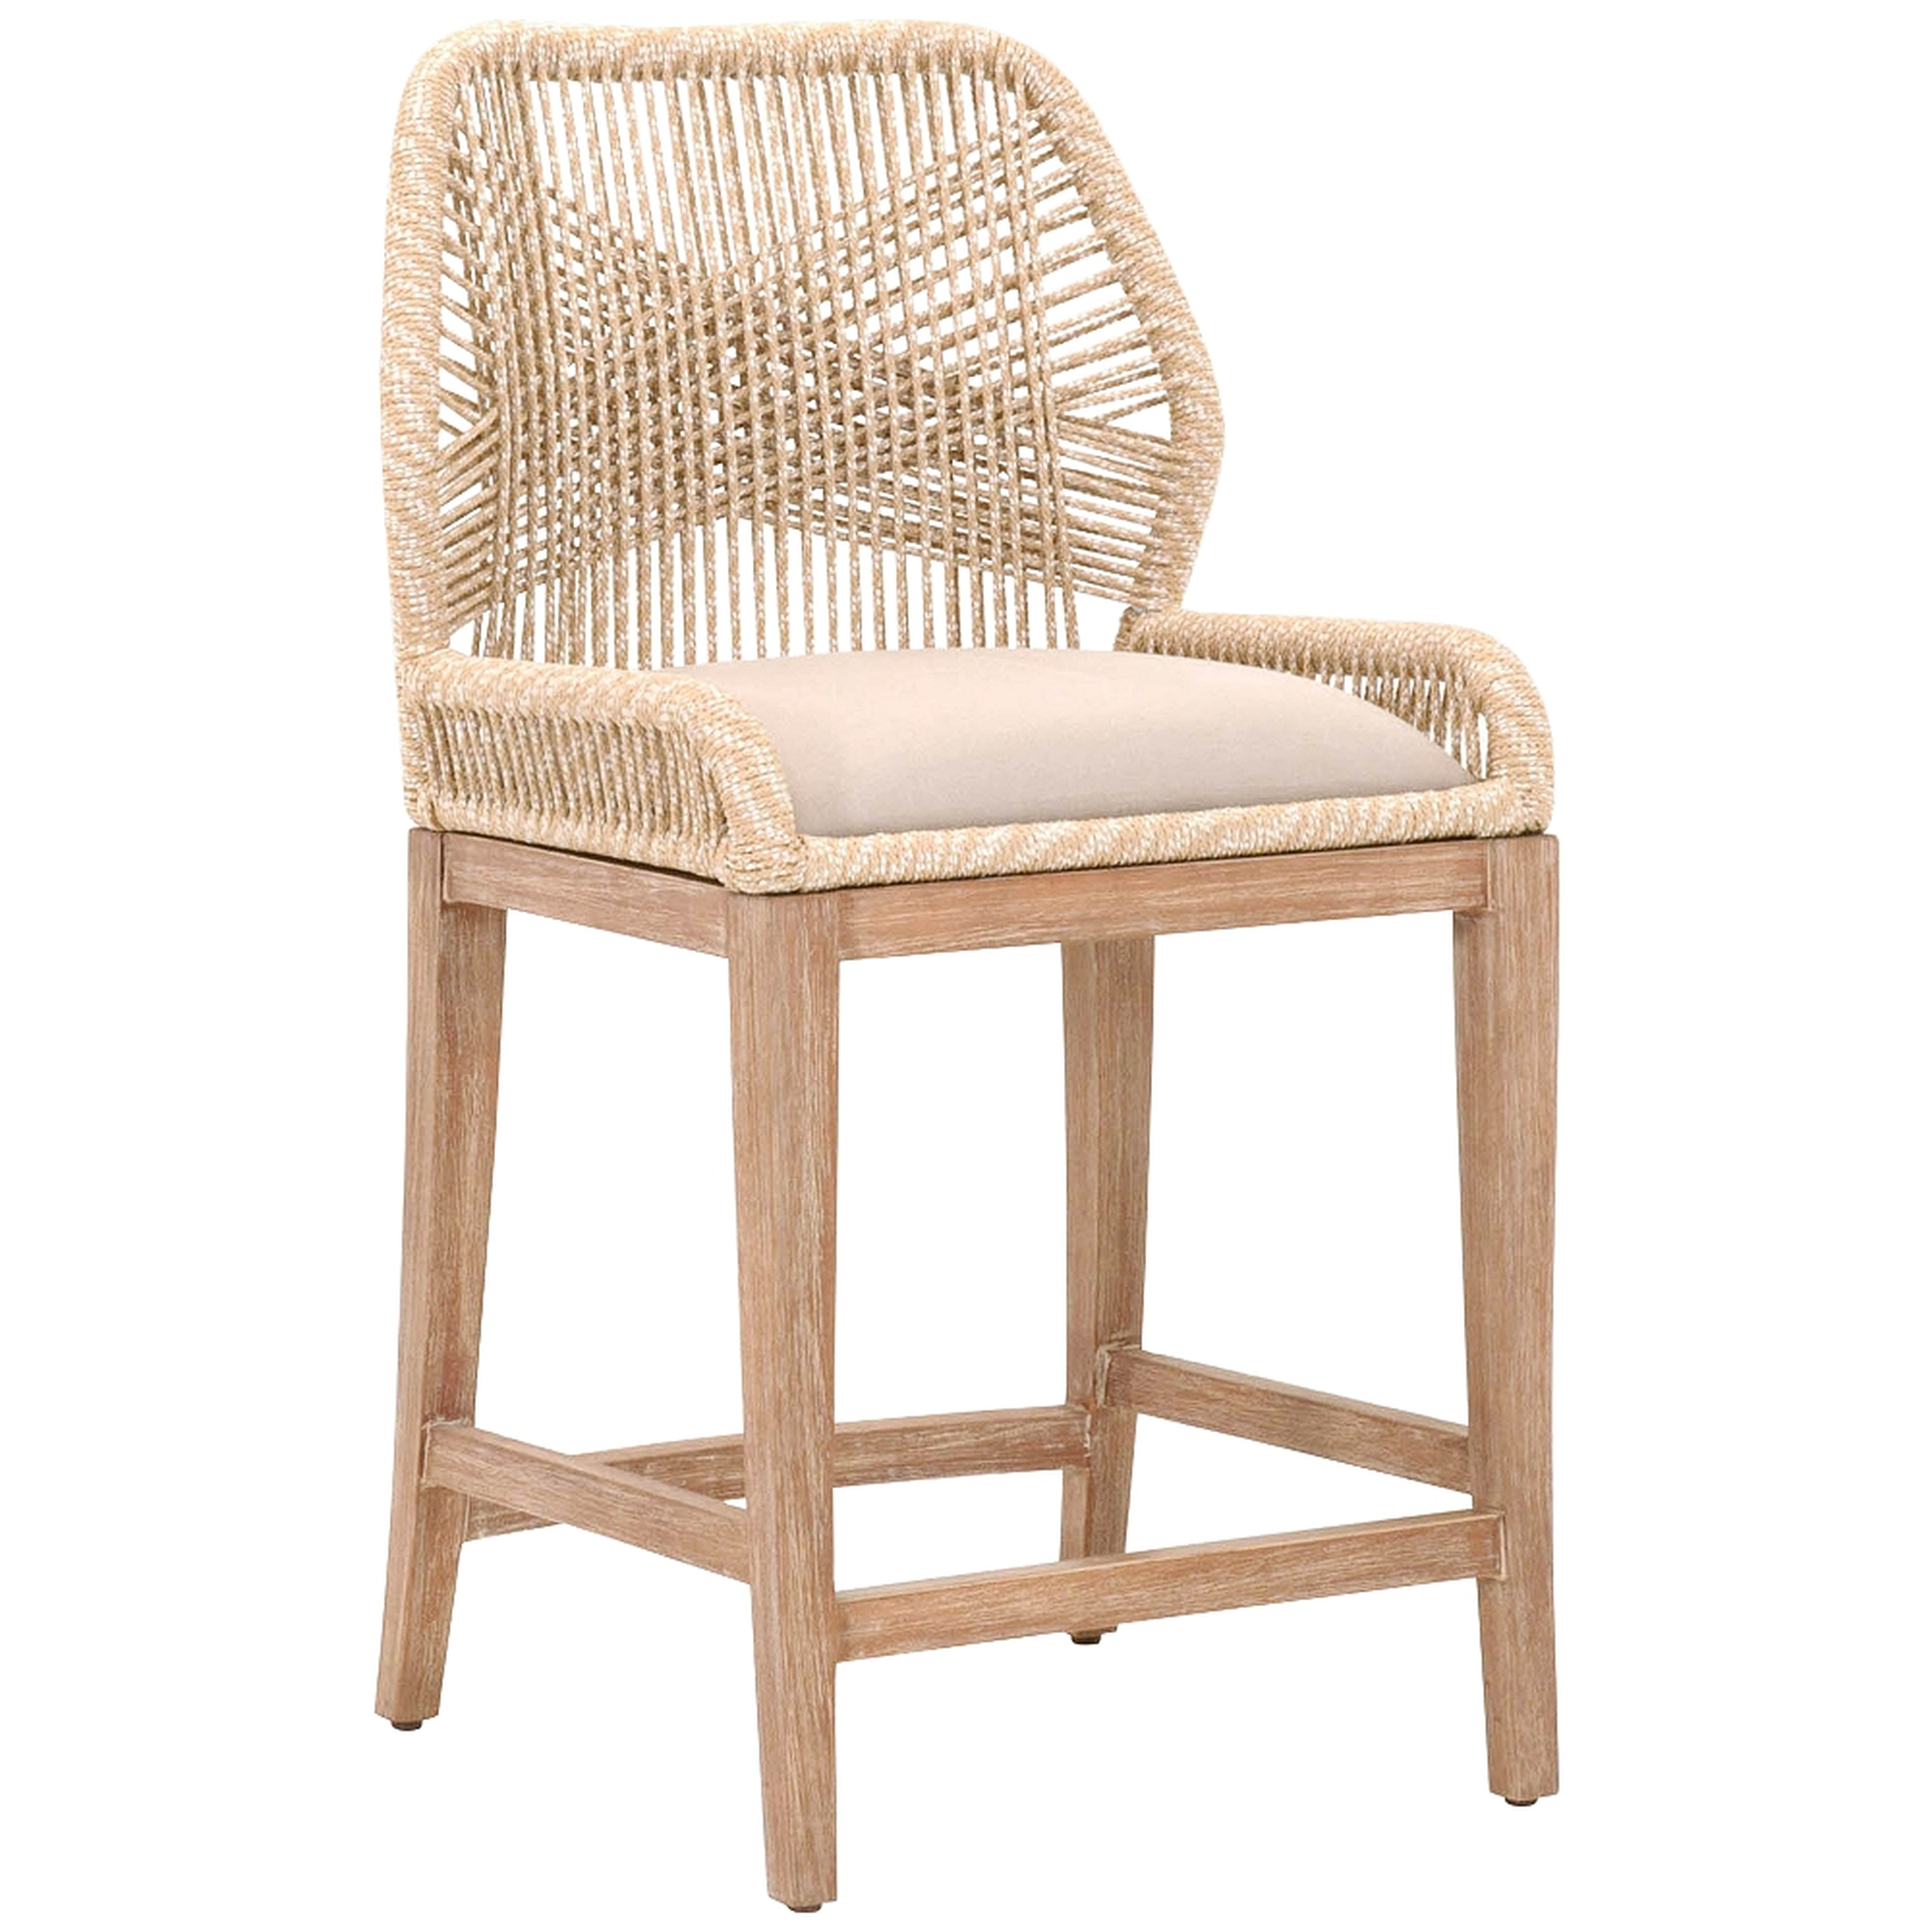 Loom 26" Sand Rope and Stone Wash Counter Stool - Style # 86H31 - Lamps Plus